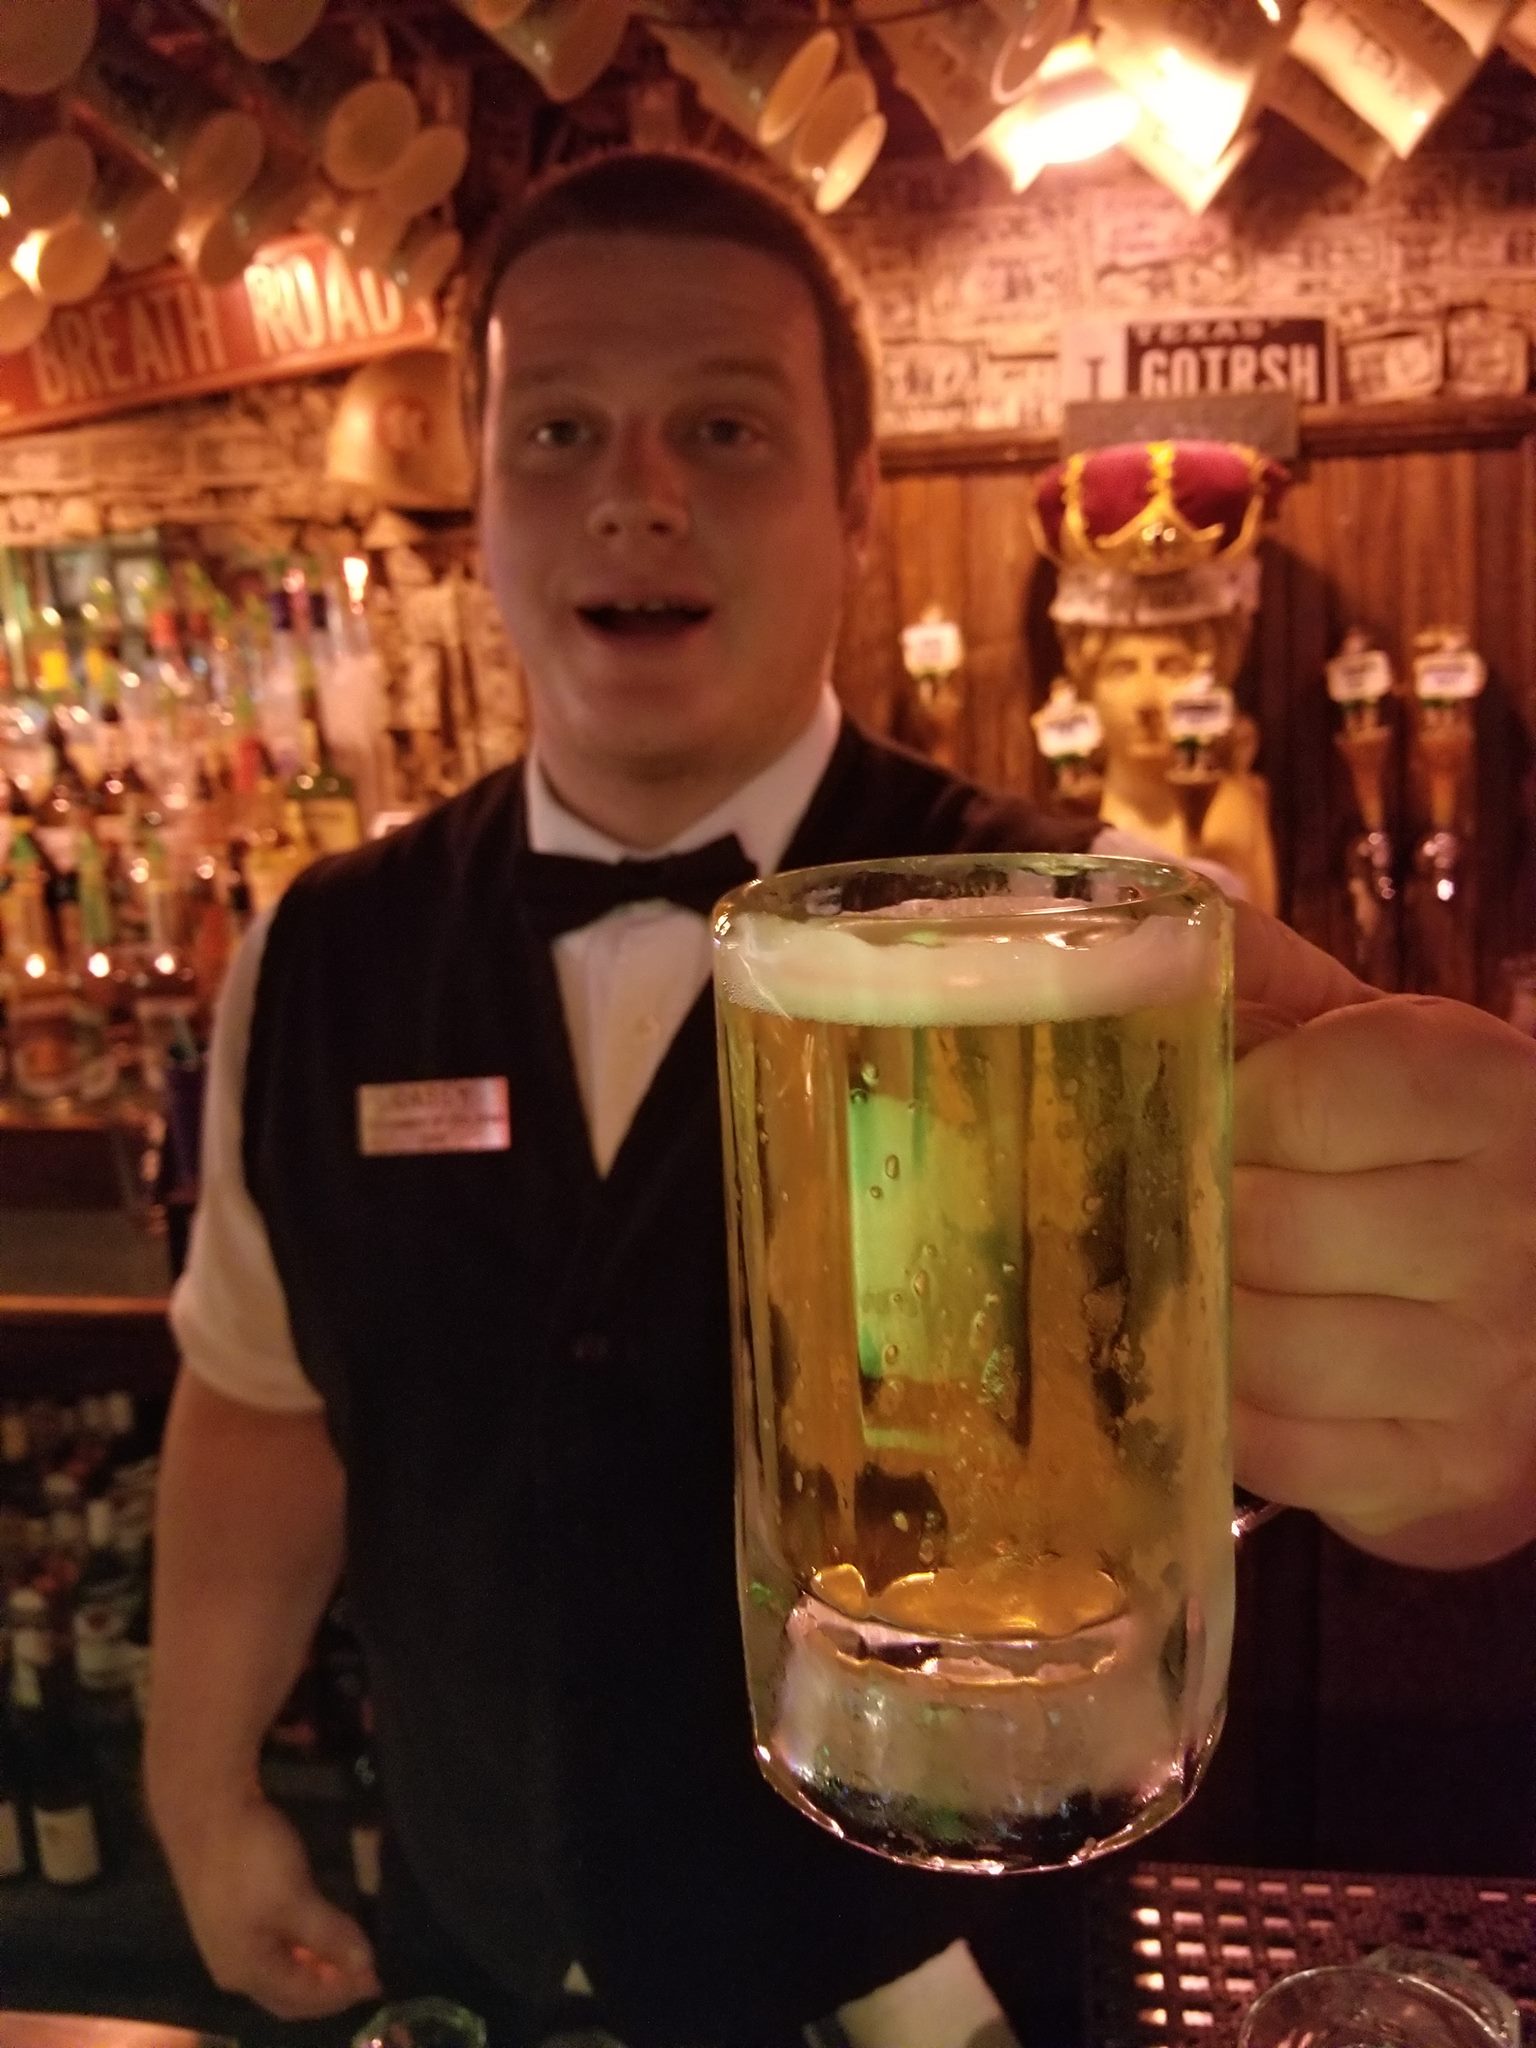 Cheers from your McGuire's bartender!